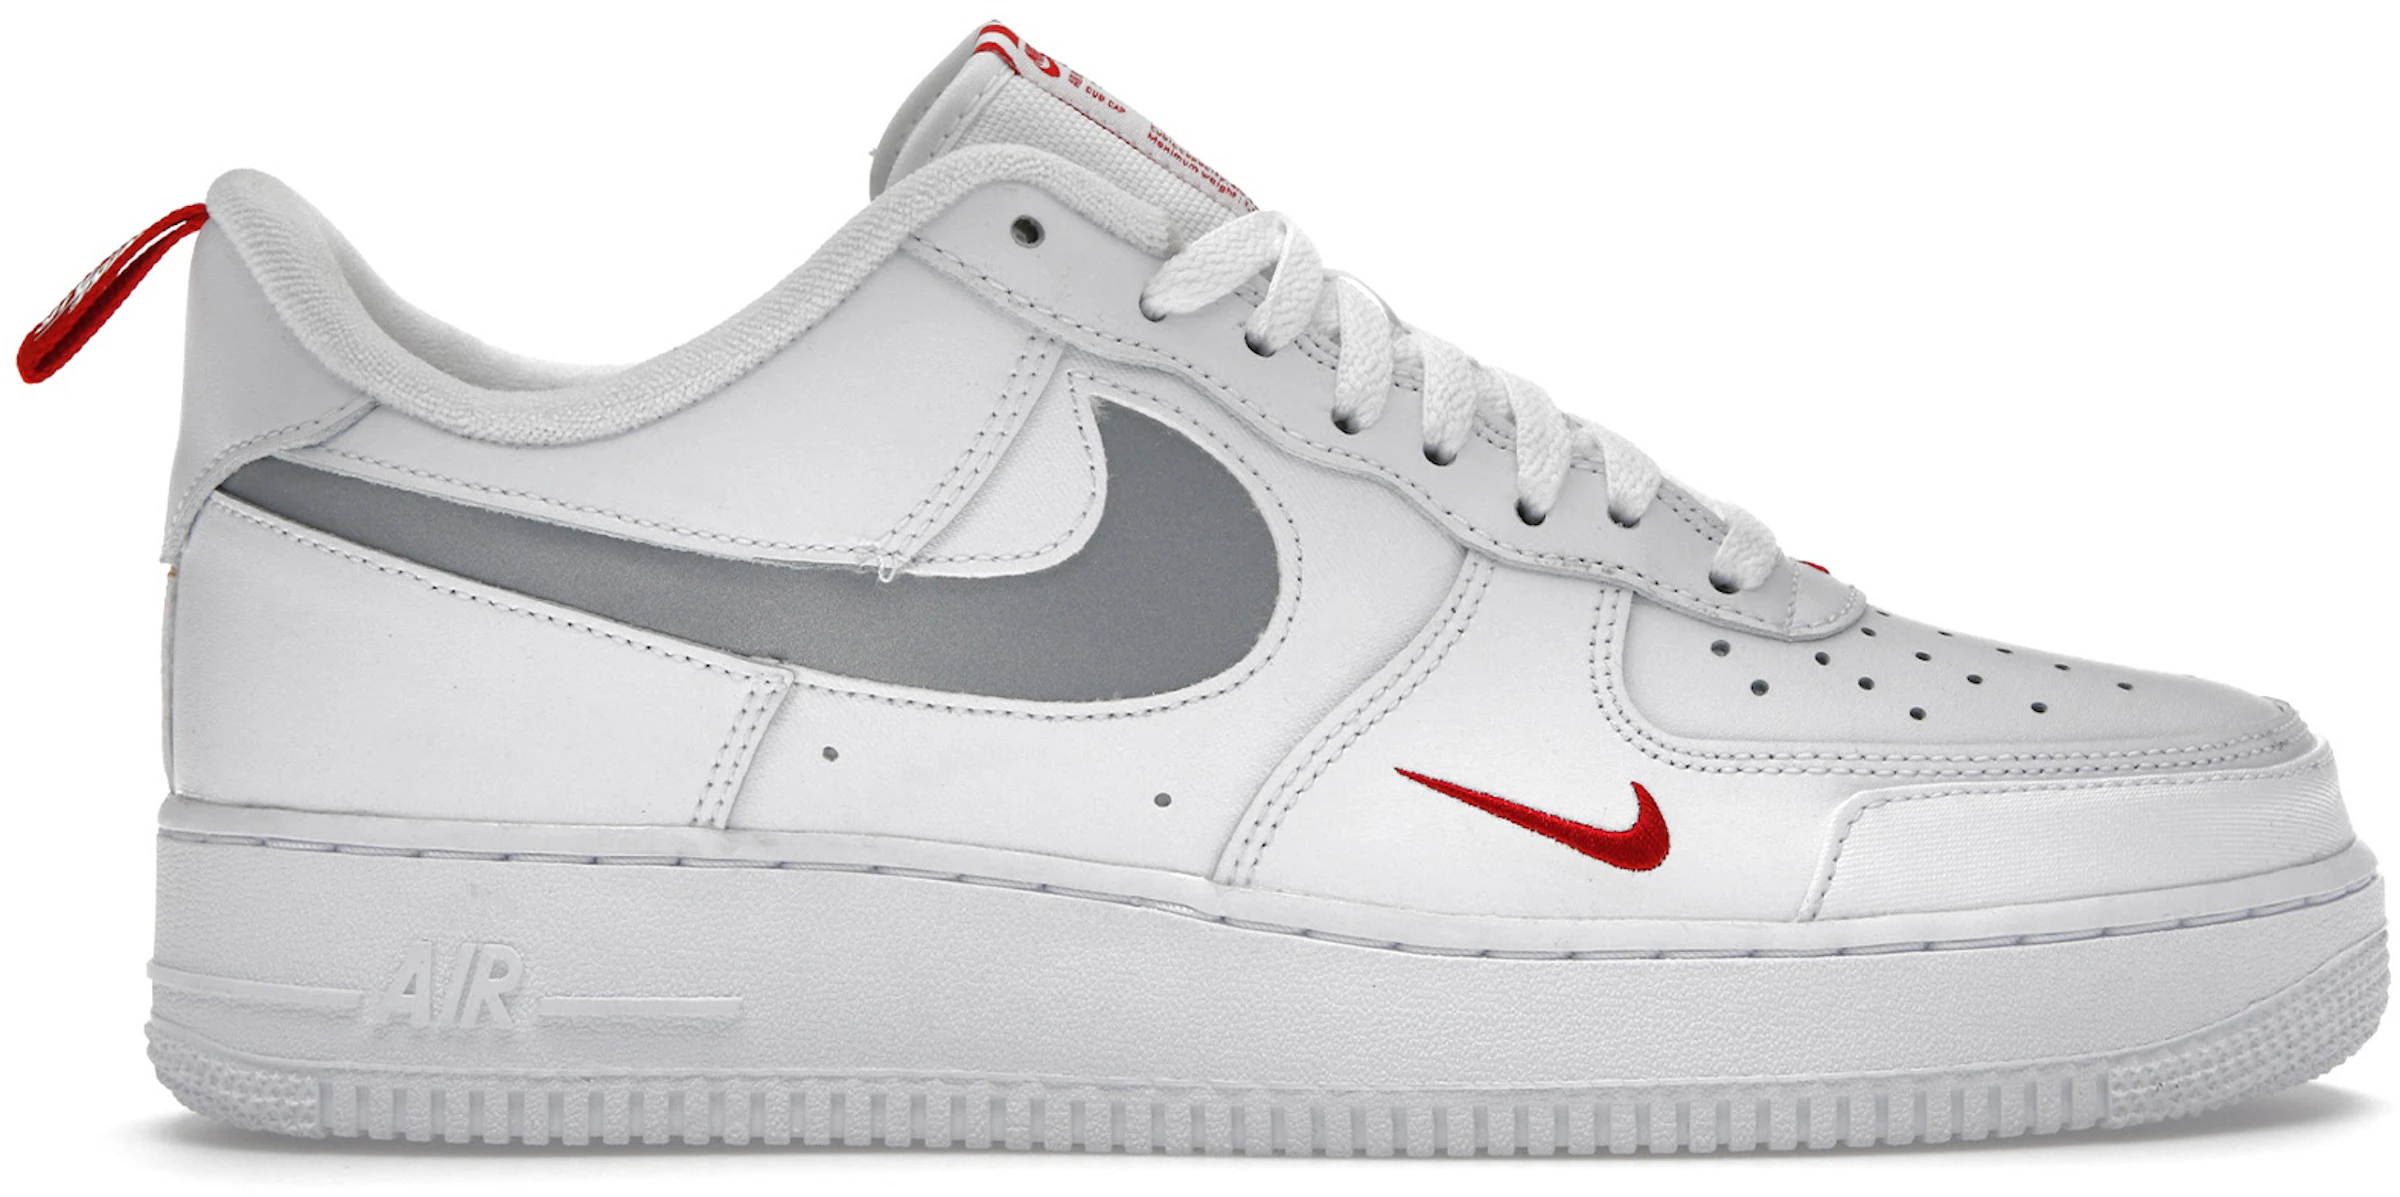 Millas Arquitectura Superposición Nike Air Force 1 Low Reflective Swoosh White University Red - DO6709-100 -  ES